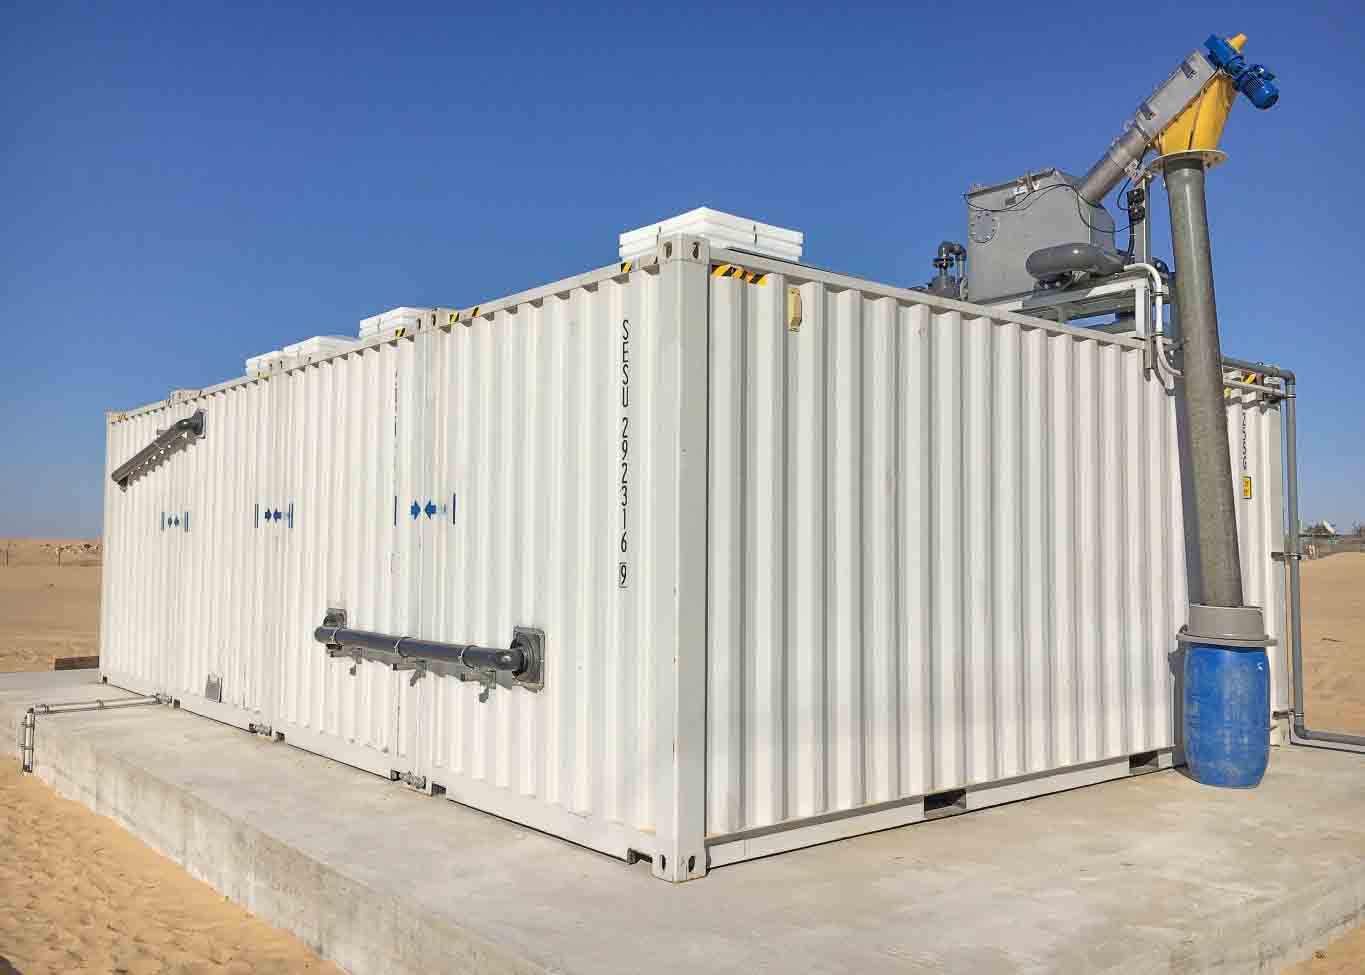 mobile wastewater treatment